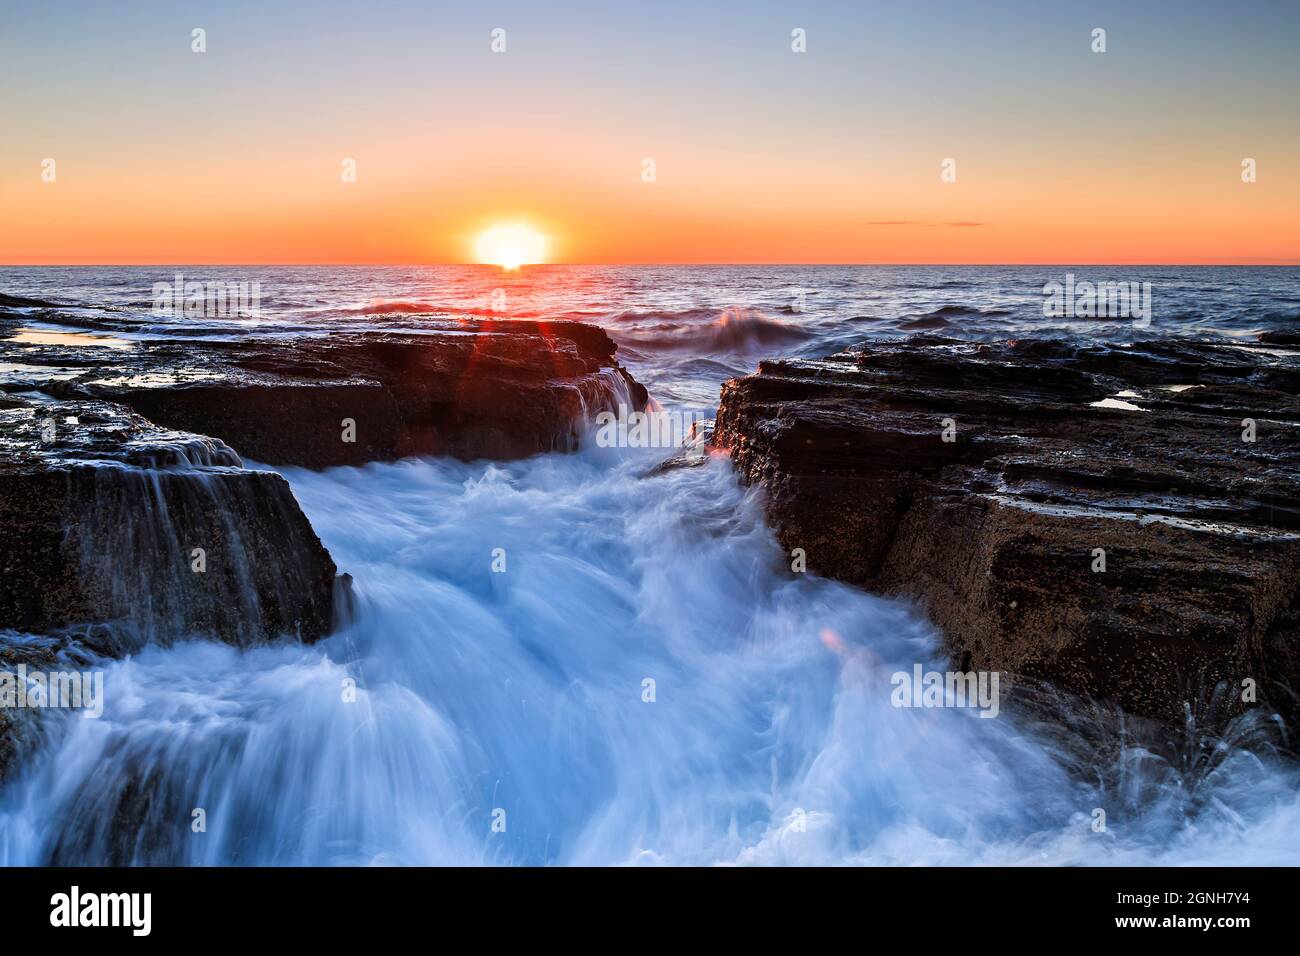 Scenic seascape at sunrise off NOrthern beaches - Pacific ocean coast in Sydney. Stock Photo